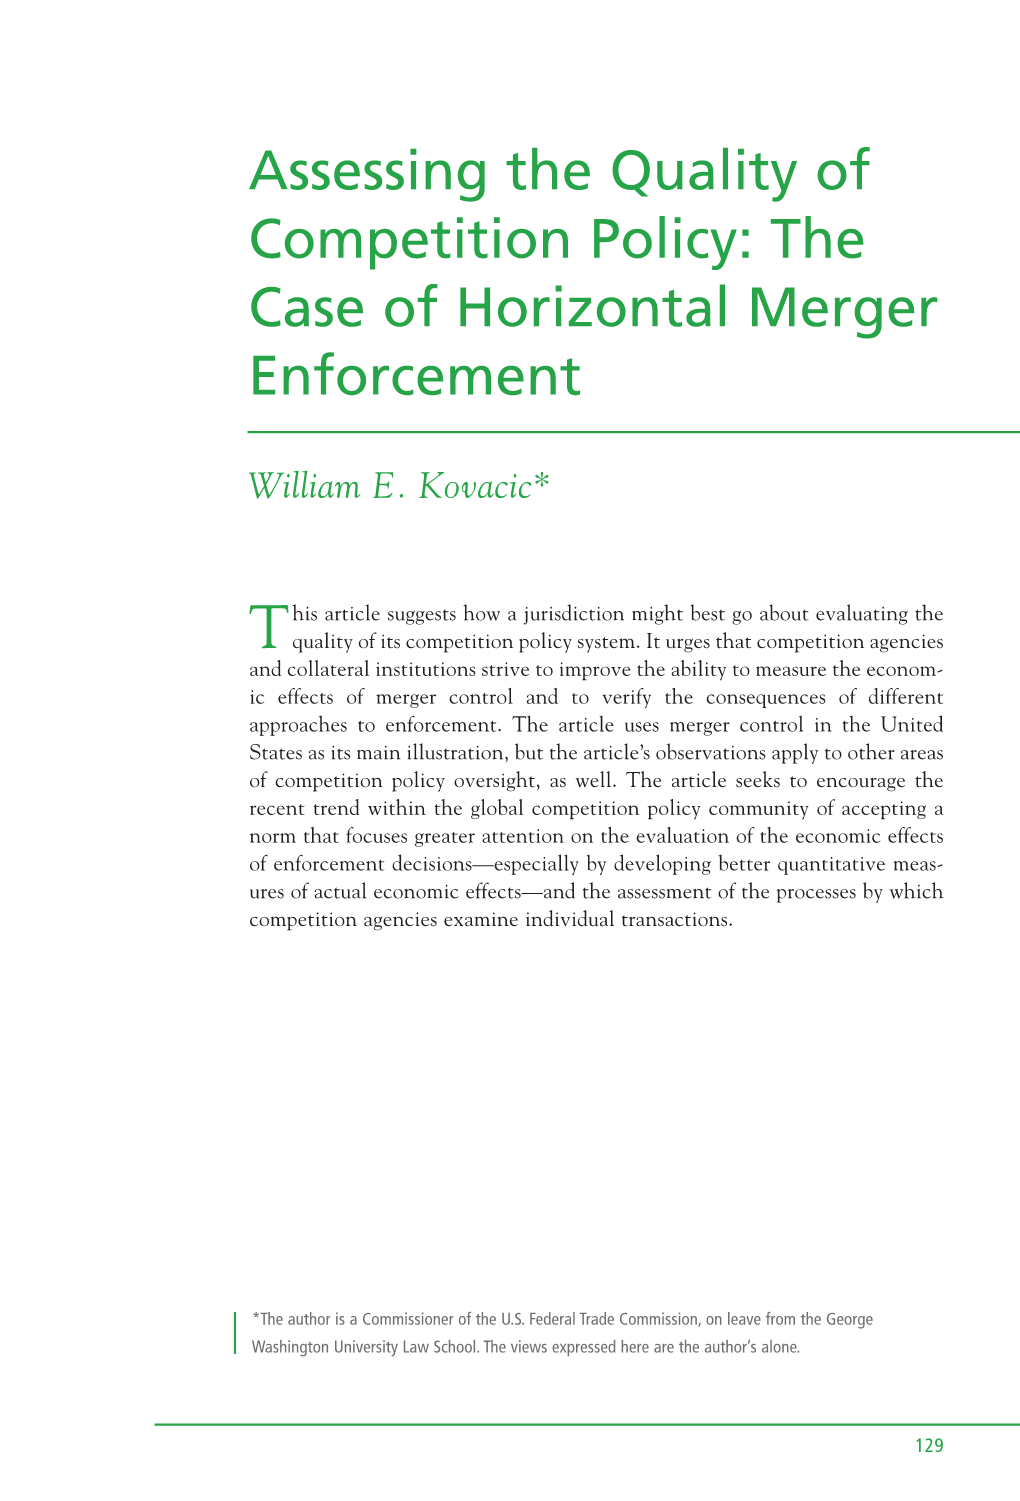 Assessing the Quality of Competition Policy: the Case of Horizontal Merger Enforcement